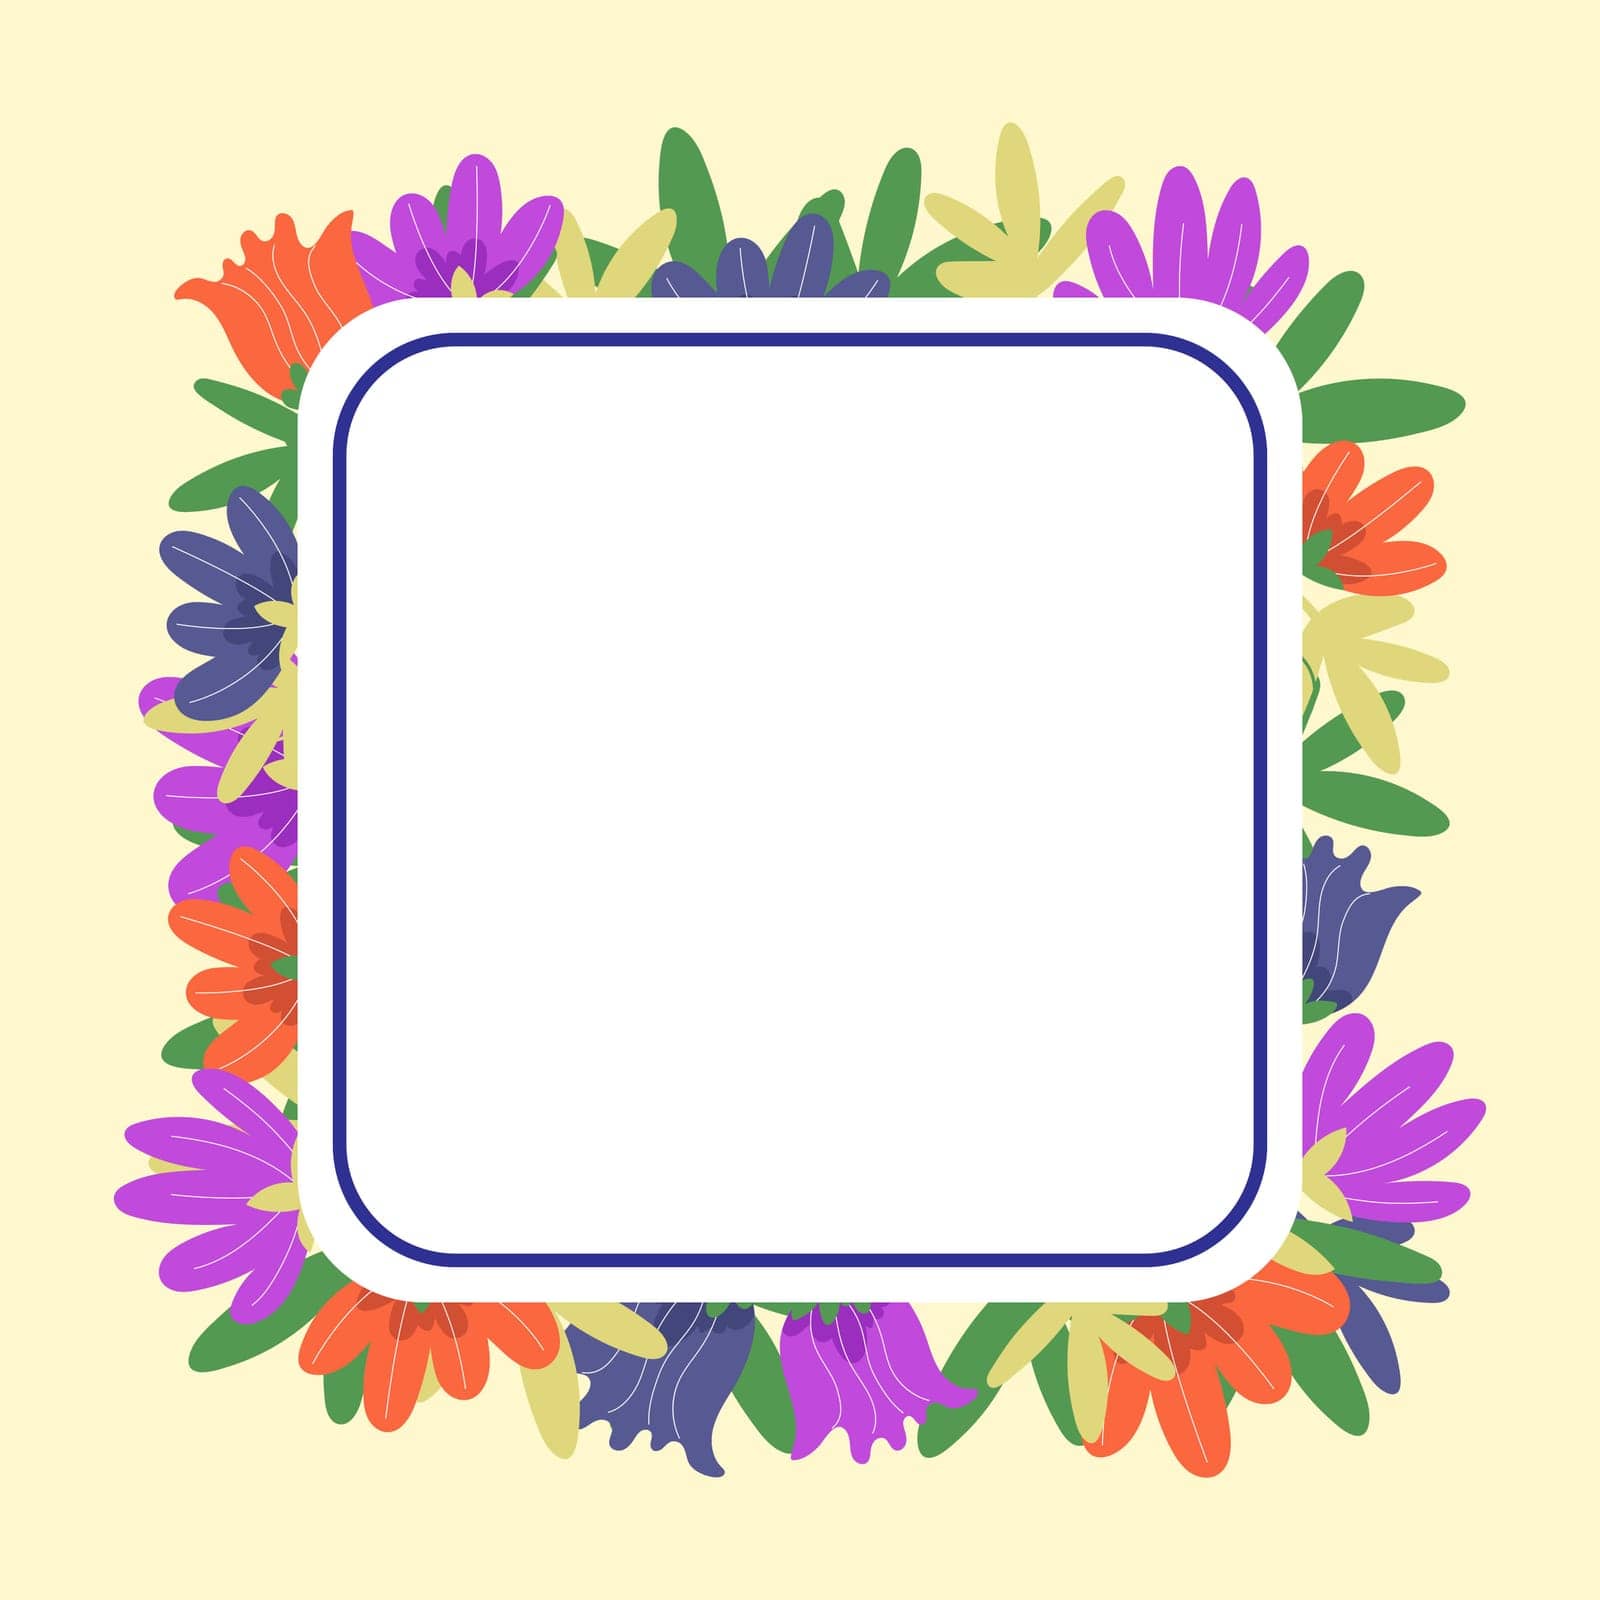 Text Frame Surrounded With Assorted Flowers Hearts And Leaves. Framework For Writing Ringed With Different Daisies, Hearts And Tree Leaves. Yellow color. Square shape. by nialowwa